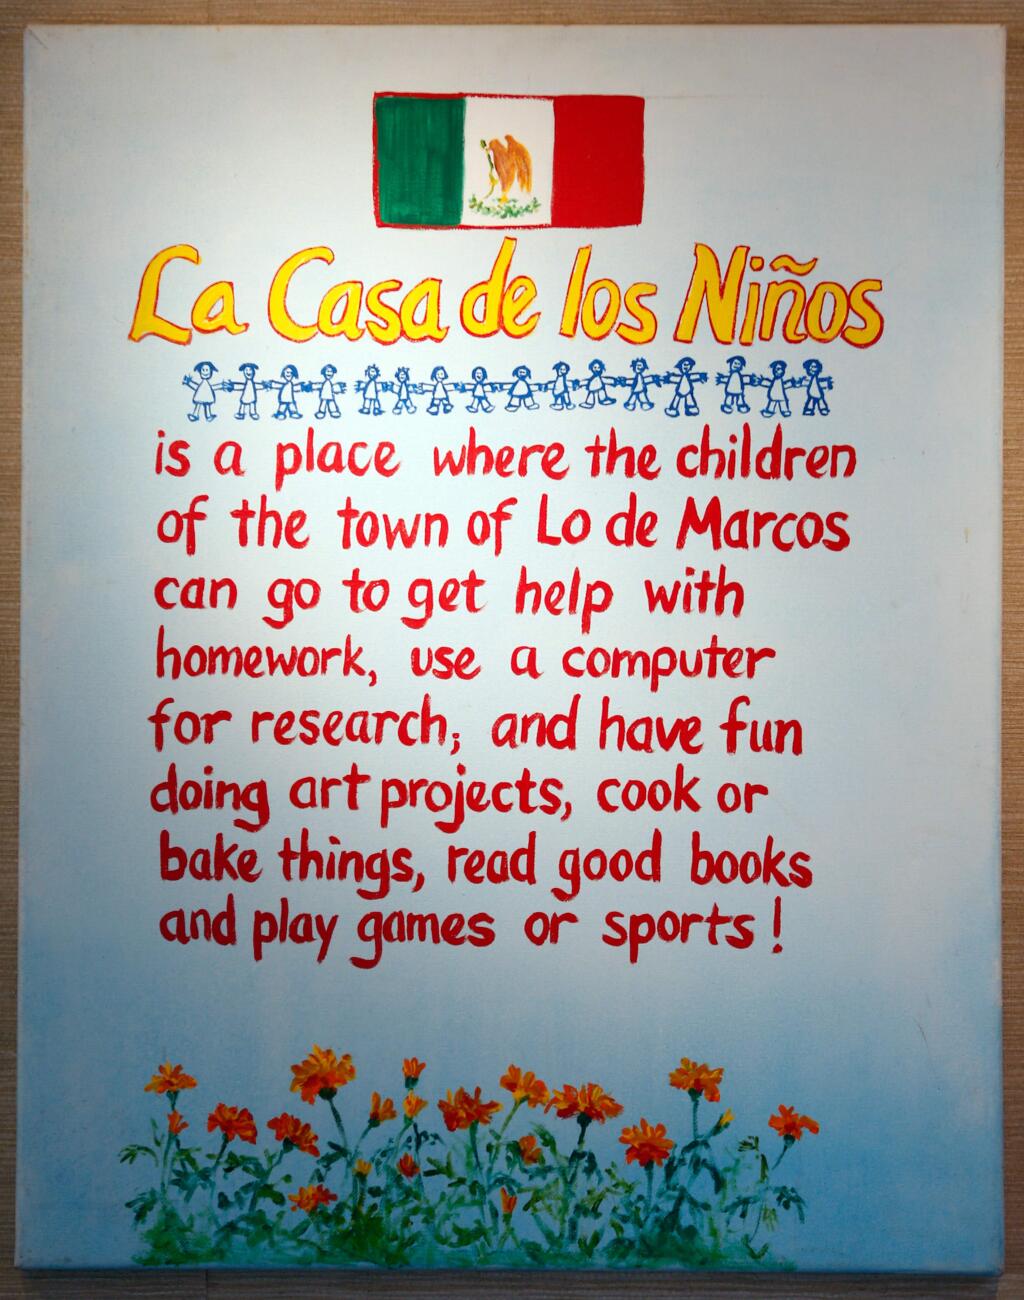 A painting about La Casa de los Niños, a nonprofit organization founded by Patricia and David Martinez and their friends Dulce and Jim Heinrich, which provides tutoring and activities for children of Lo de Marcos, Mexico, is displayed at the Martinez home. (Alvin Jornada / The Press Democrat)